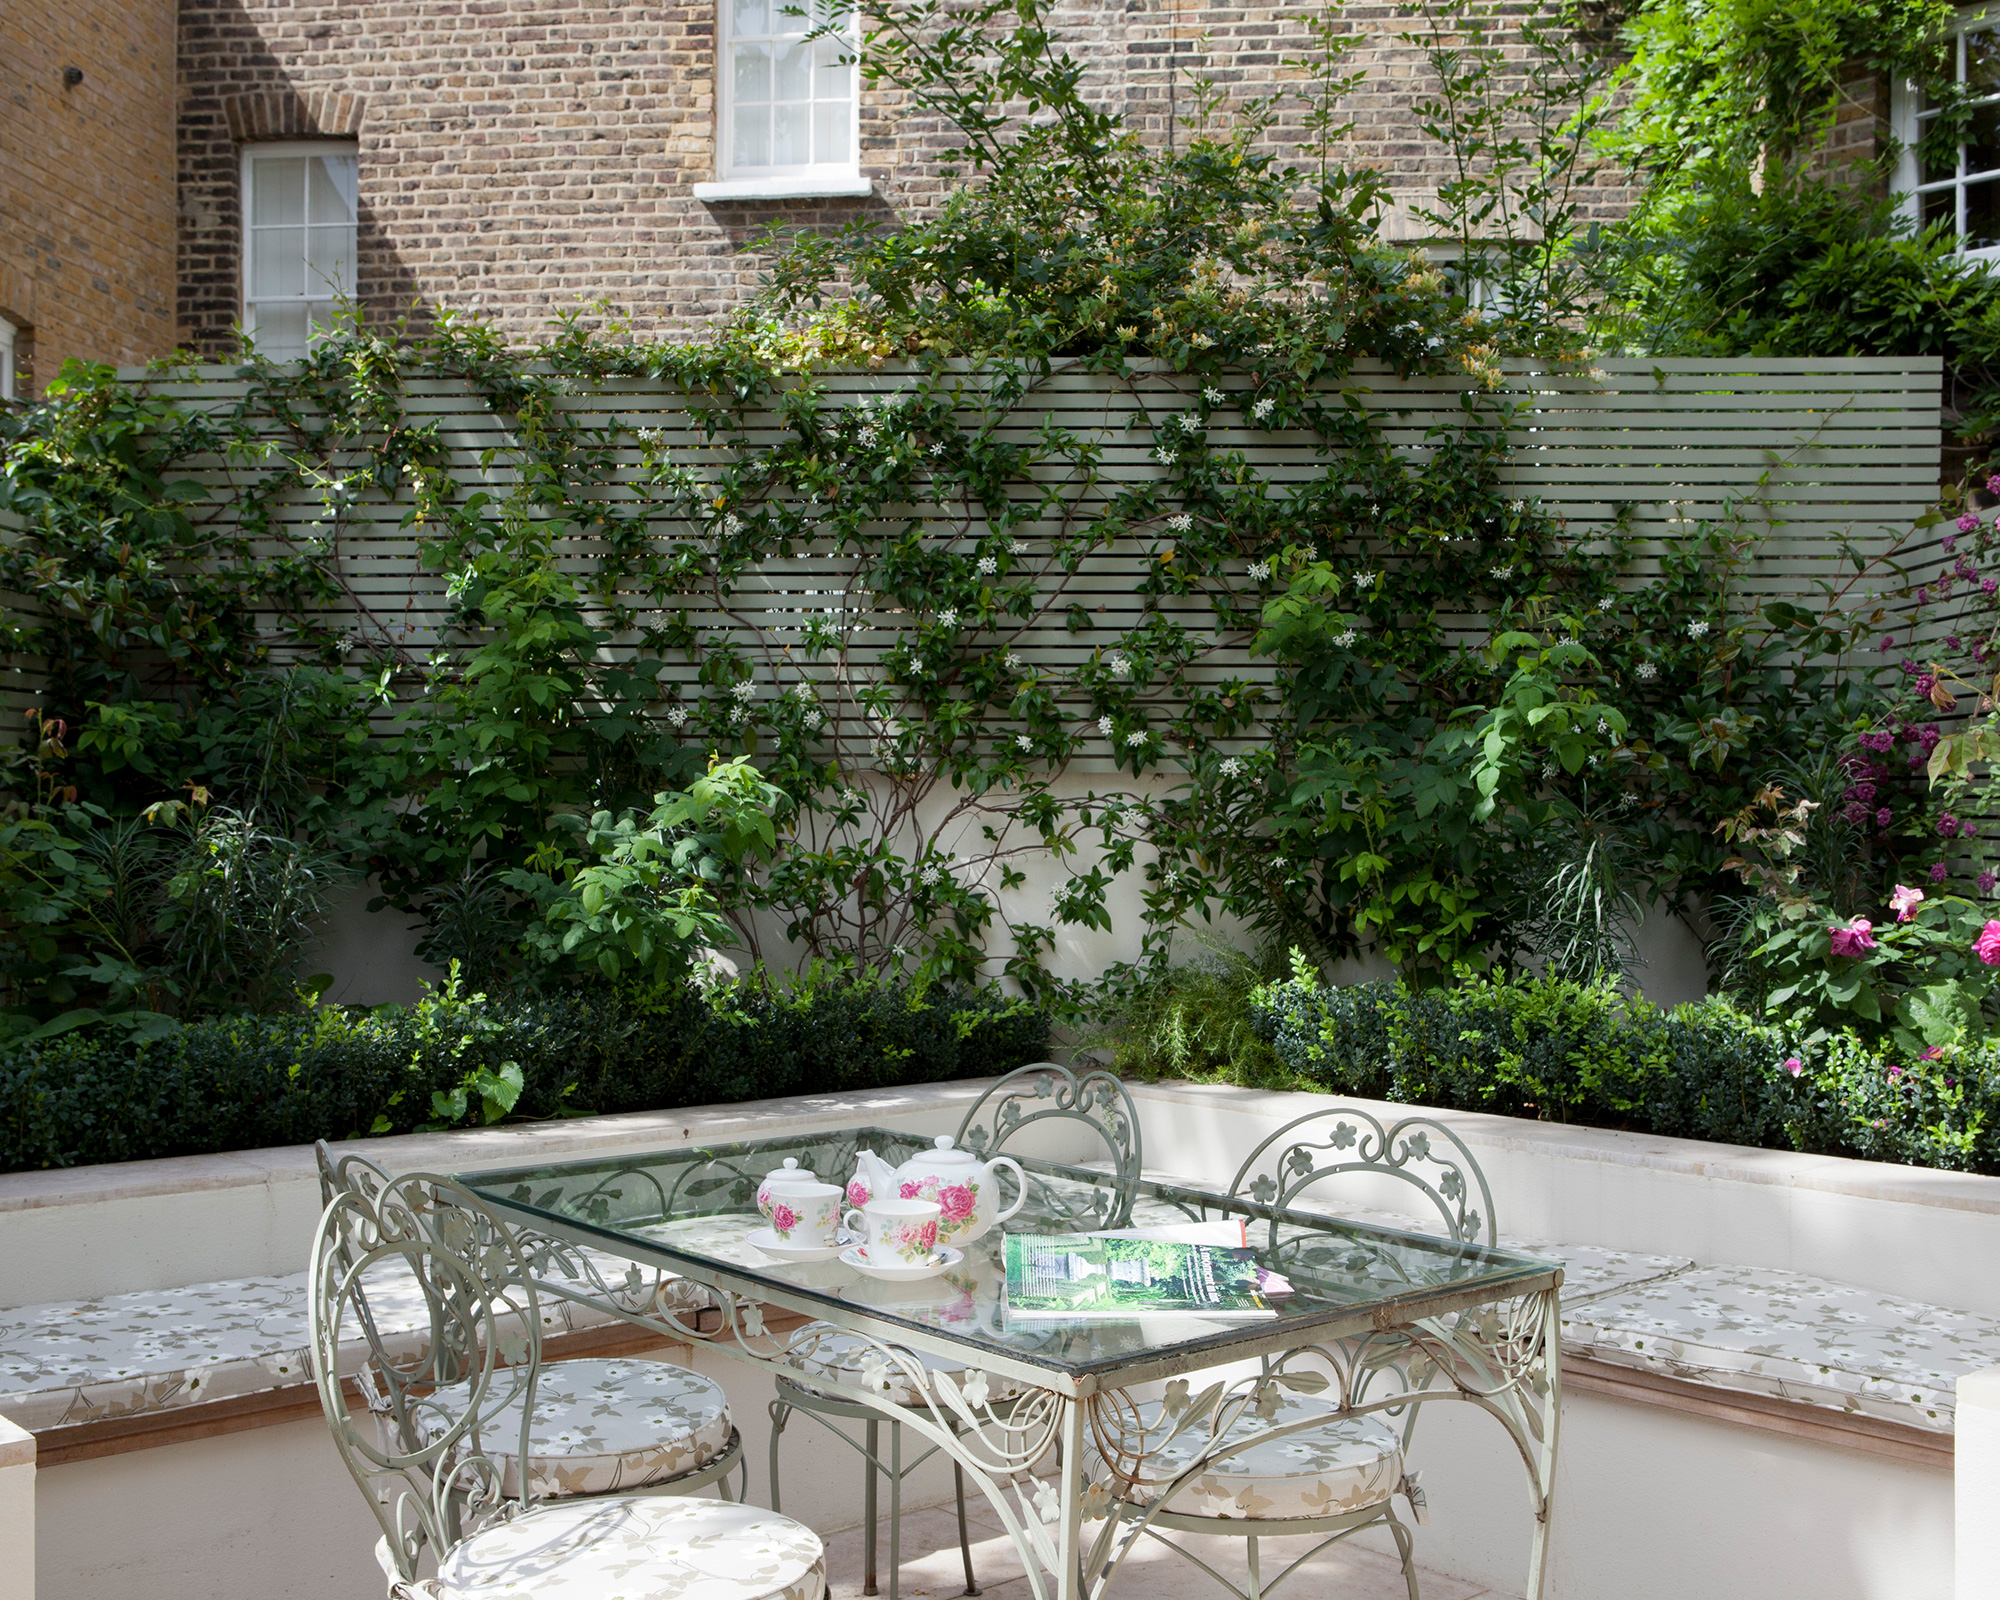 Patio planting ideas with built-in seating and dining table in a town garden.